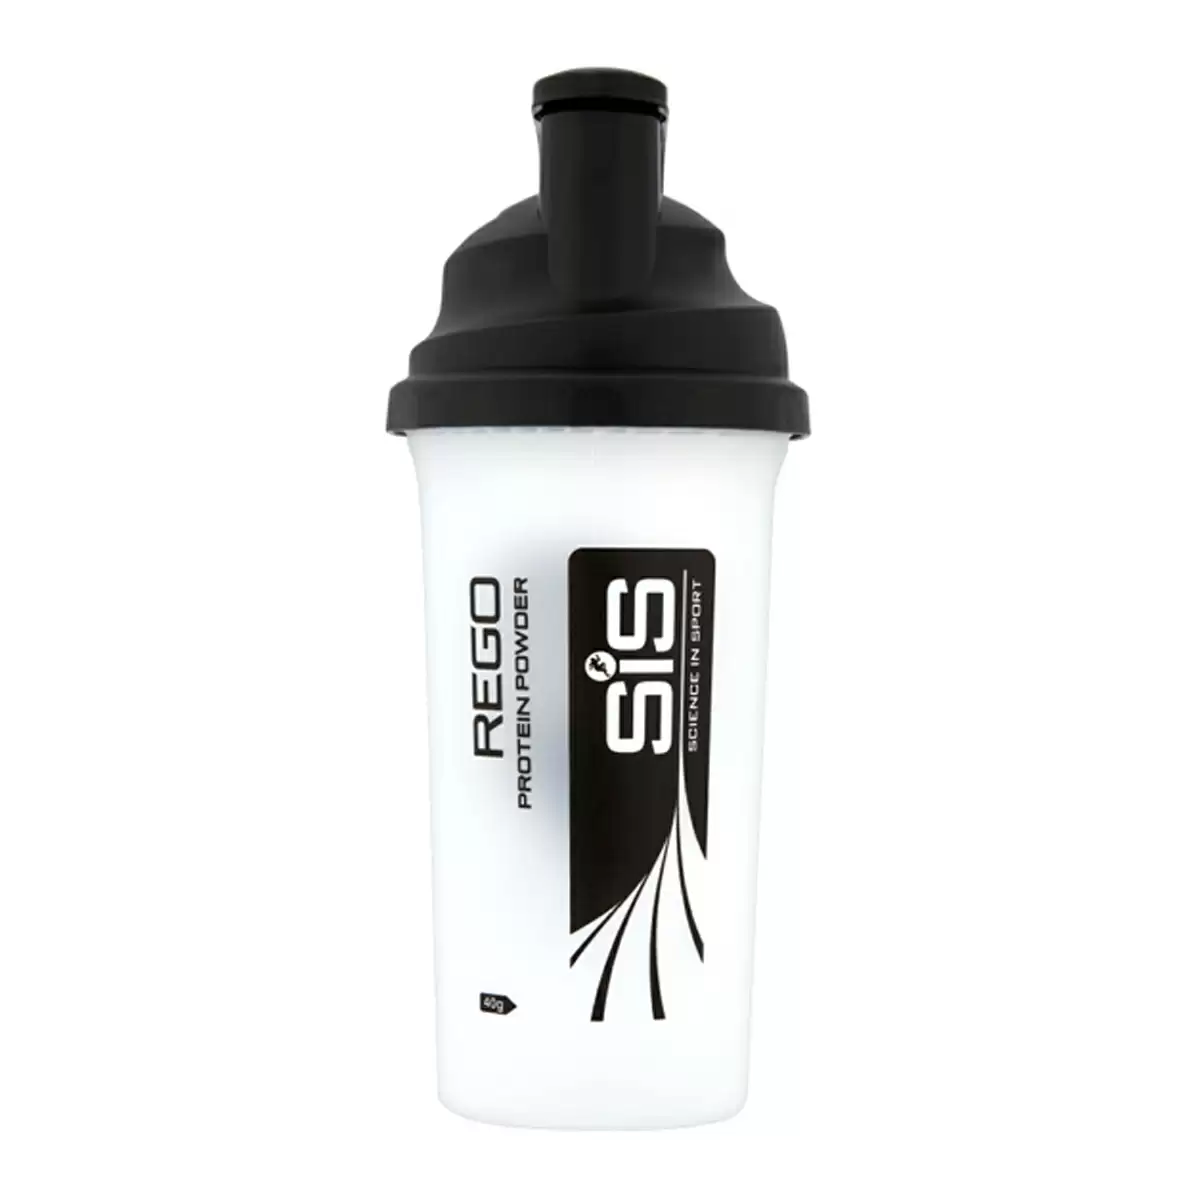 Shaker recovery transparent 700ml - image